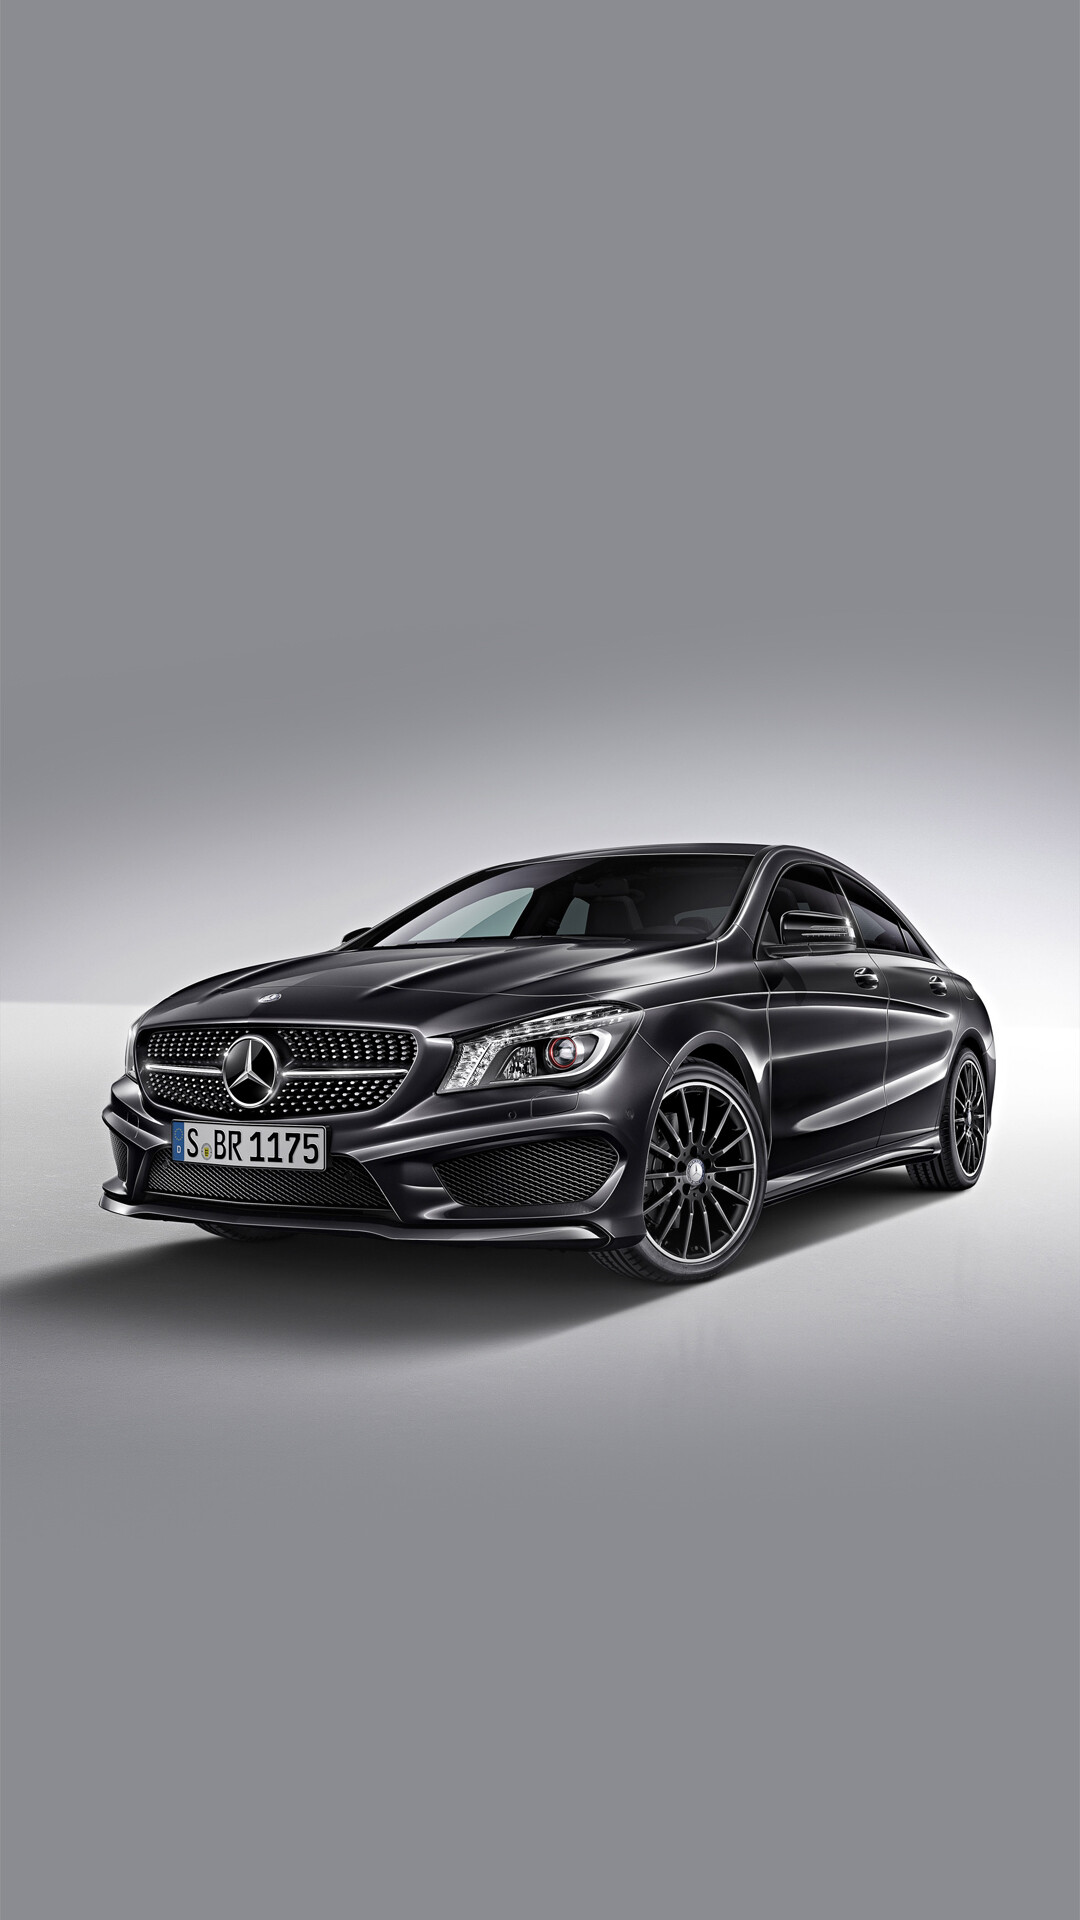 Mercedes-Benz: CLA 250, The first branded vehicles were produced in 1926. 1080x1920 Full HD Wallpaper.